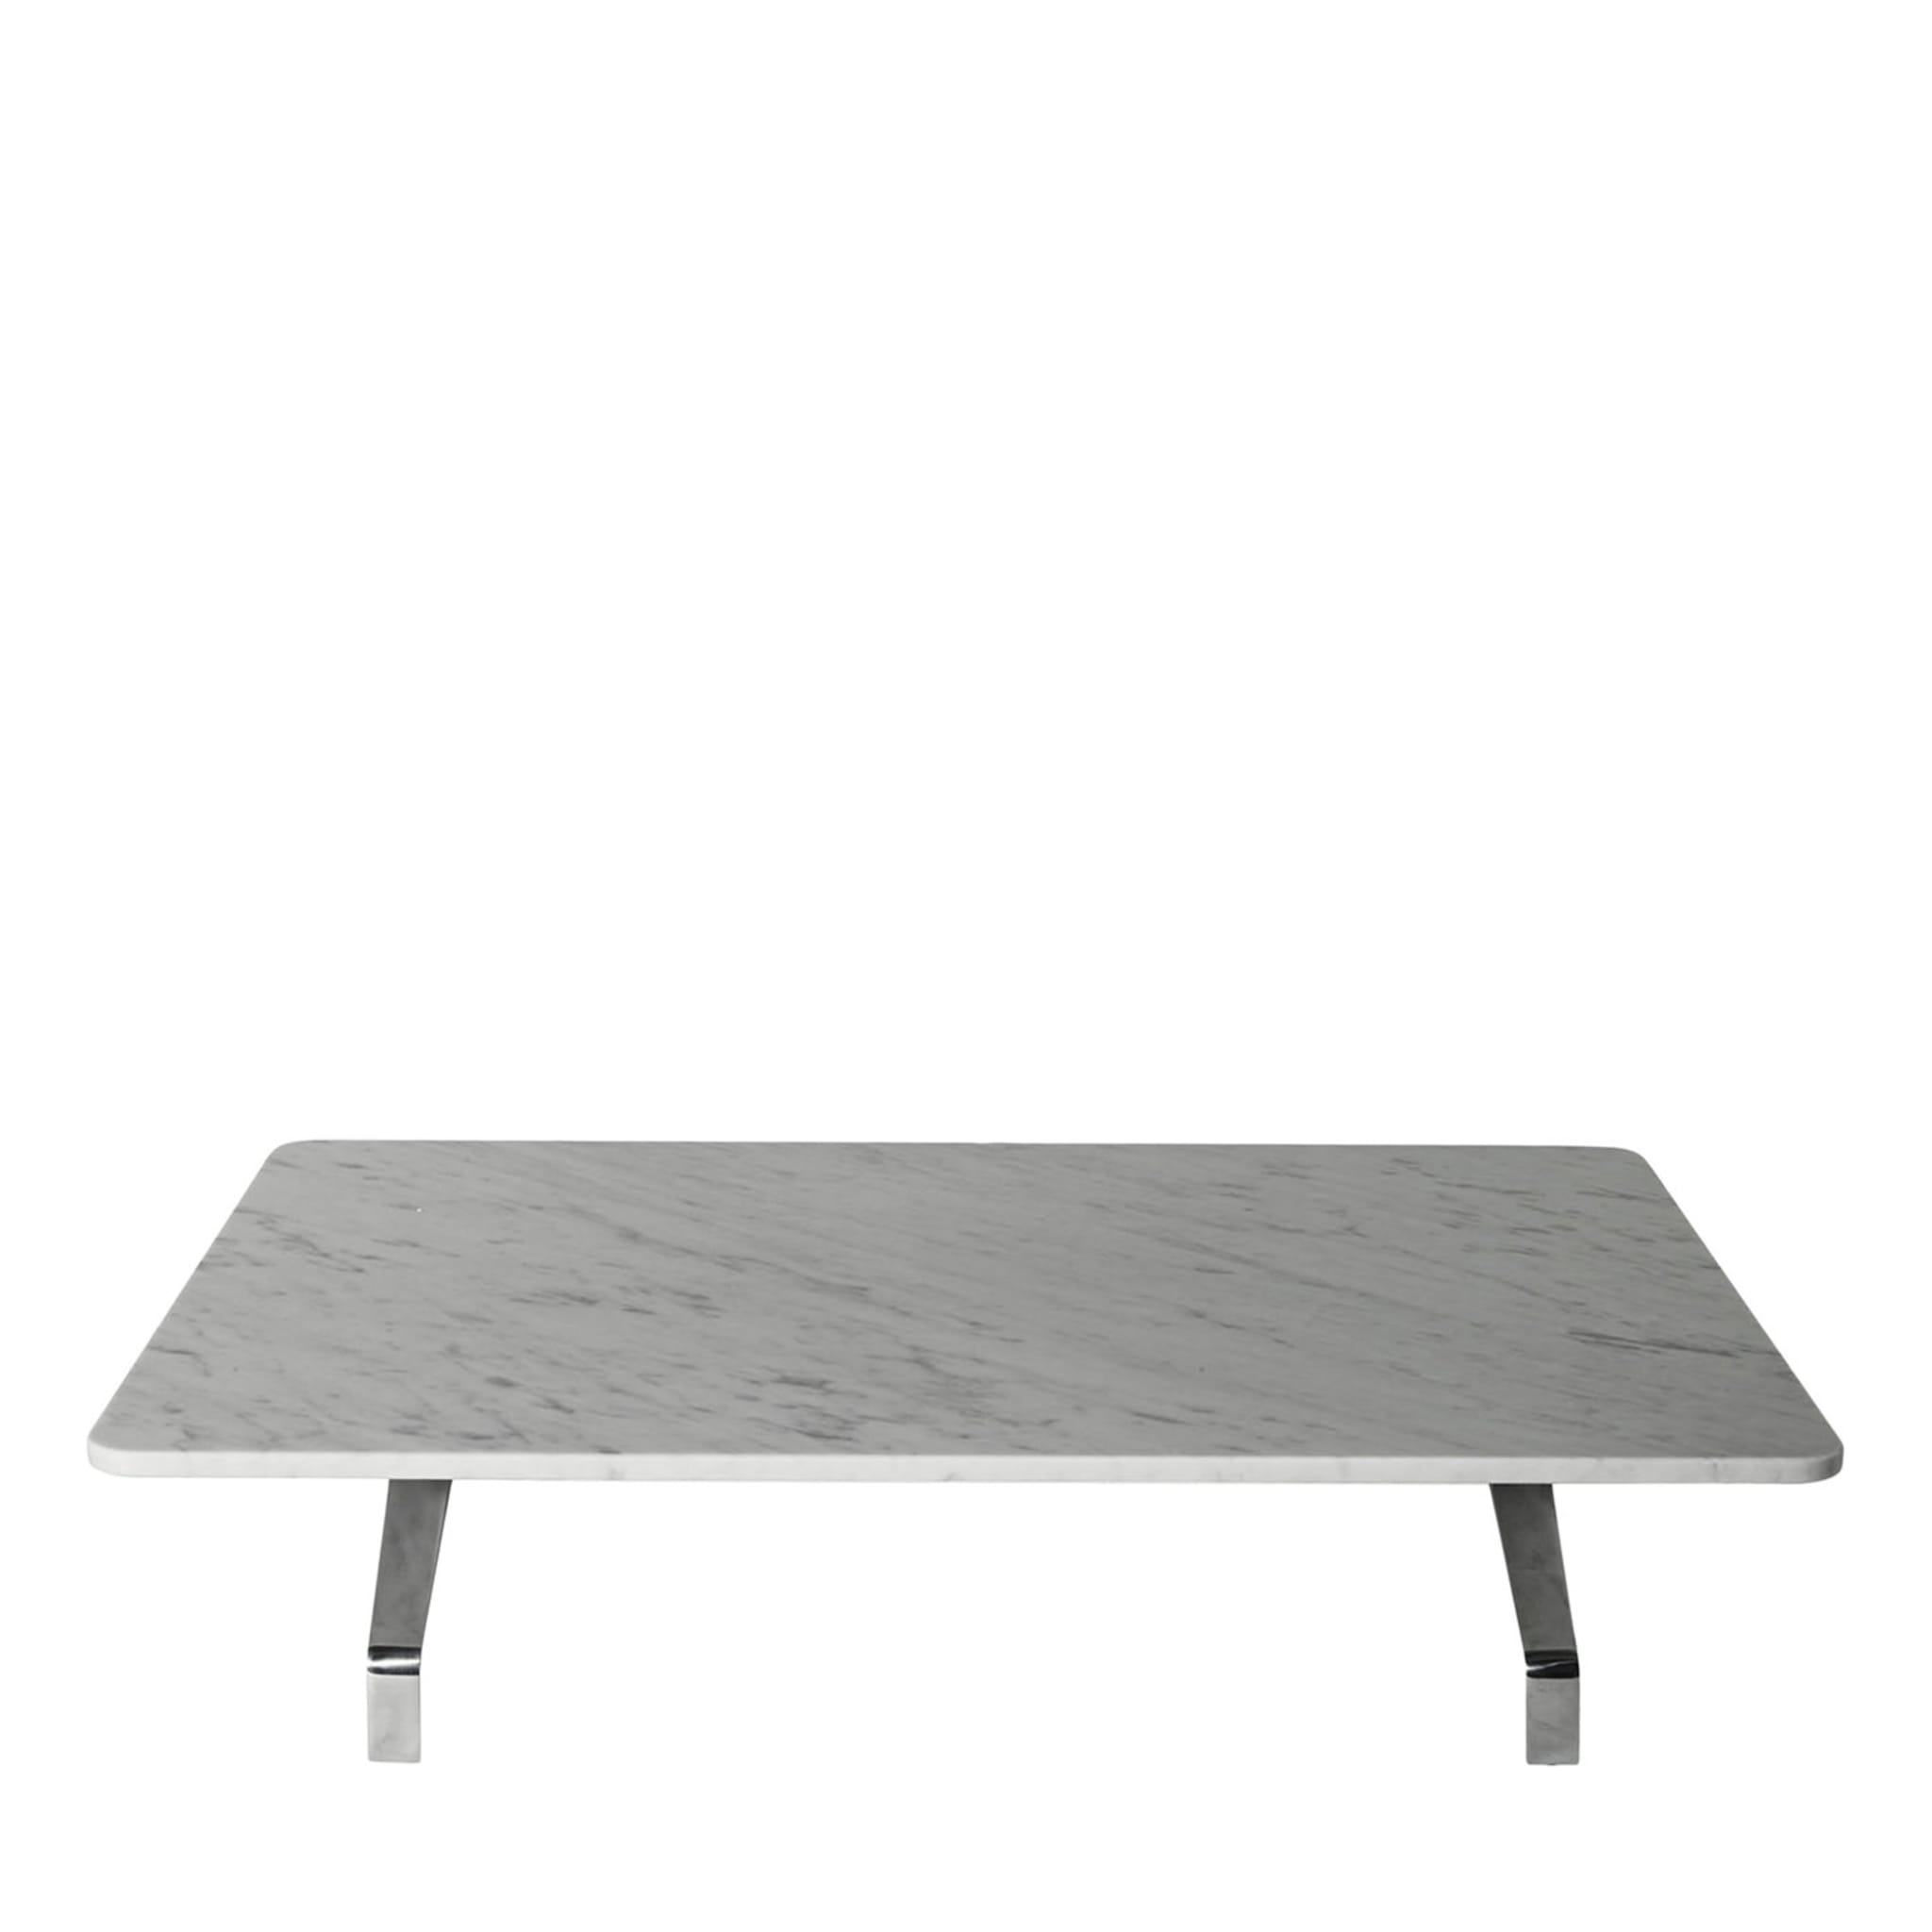 Pons Small White Marble Table by Rodolfo Dordoni - Main view